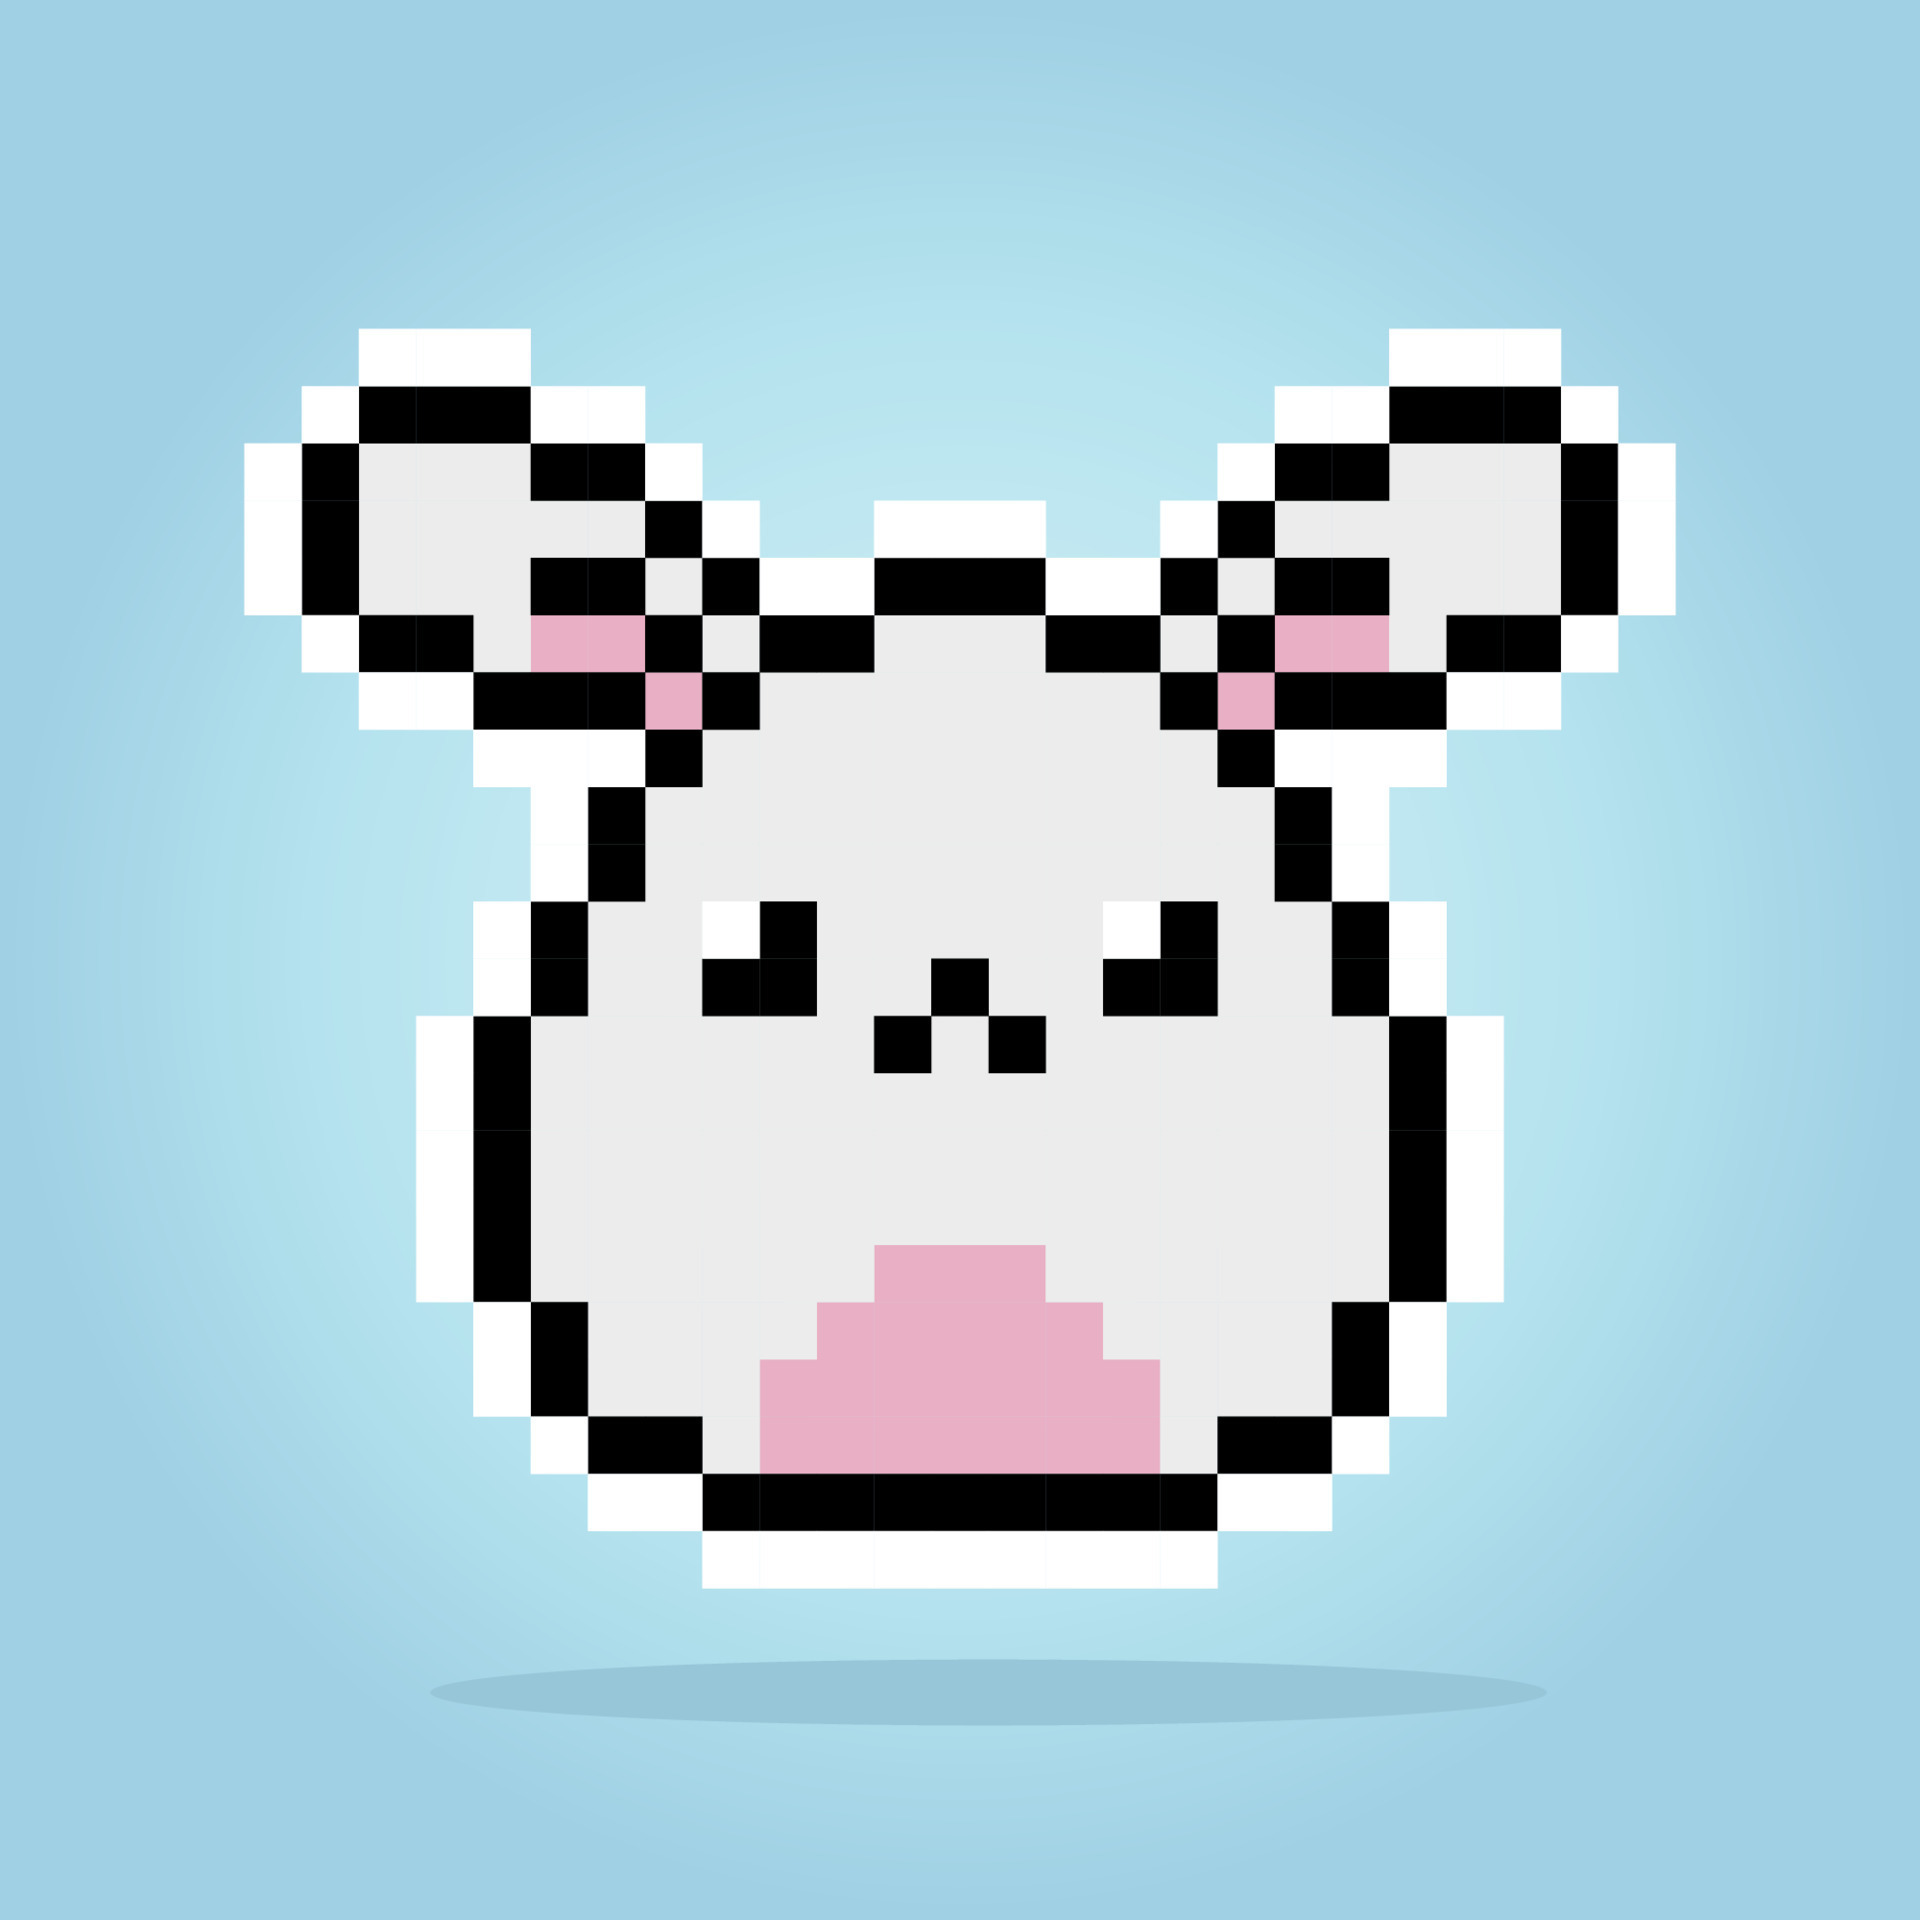 Pixel 8 bit cute bunny. Animal game assets in vector illustration ...